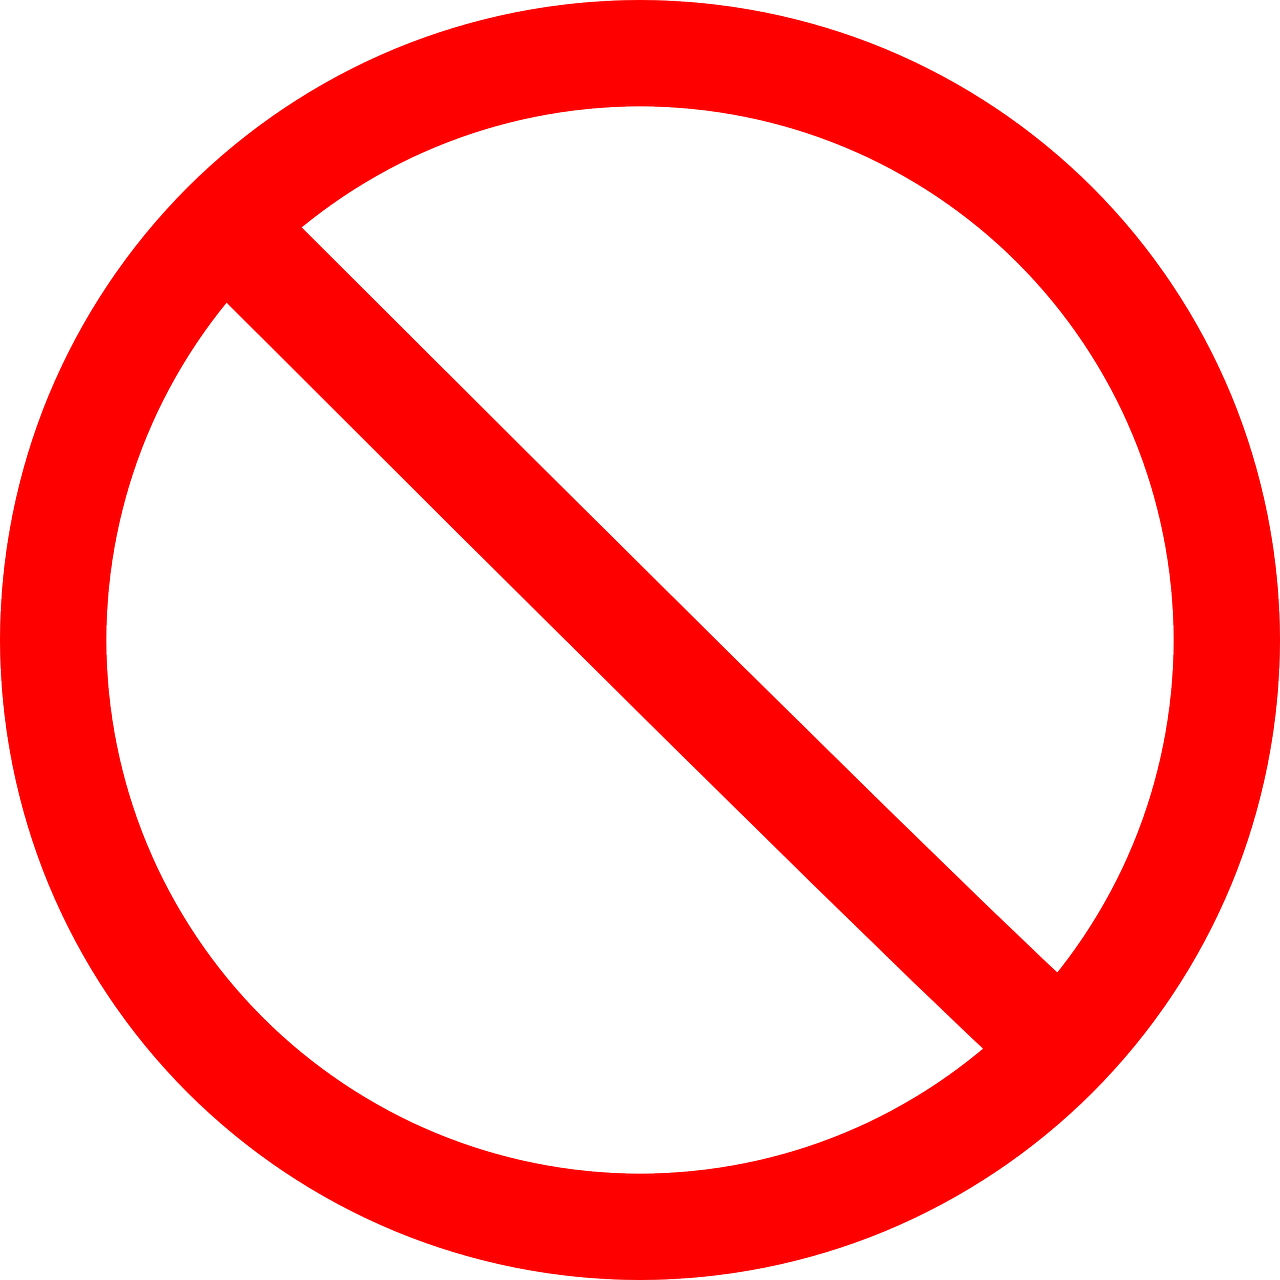 a red no entry sign on a white background, by Kōno Michisei, pixabay, plasticien, thin red lines, without glasses, circle, carbon